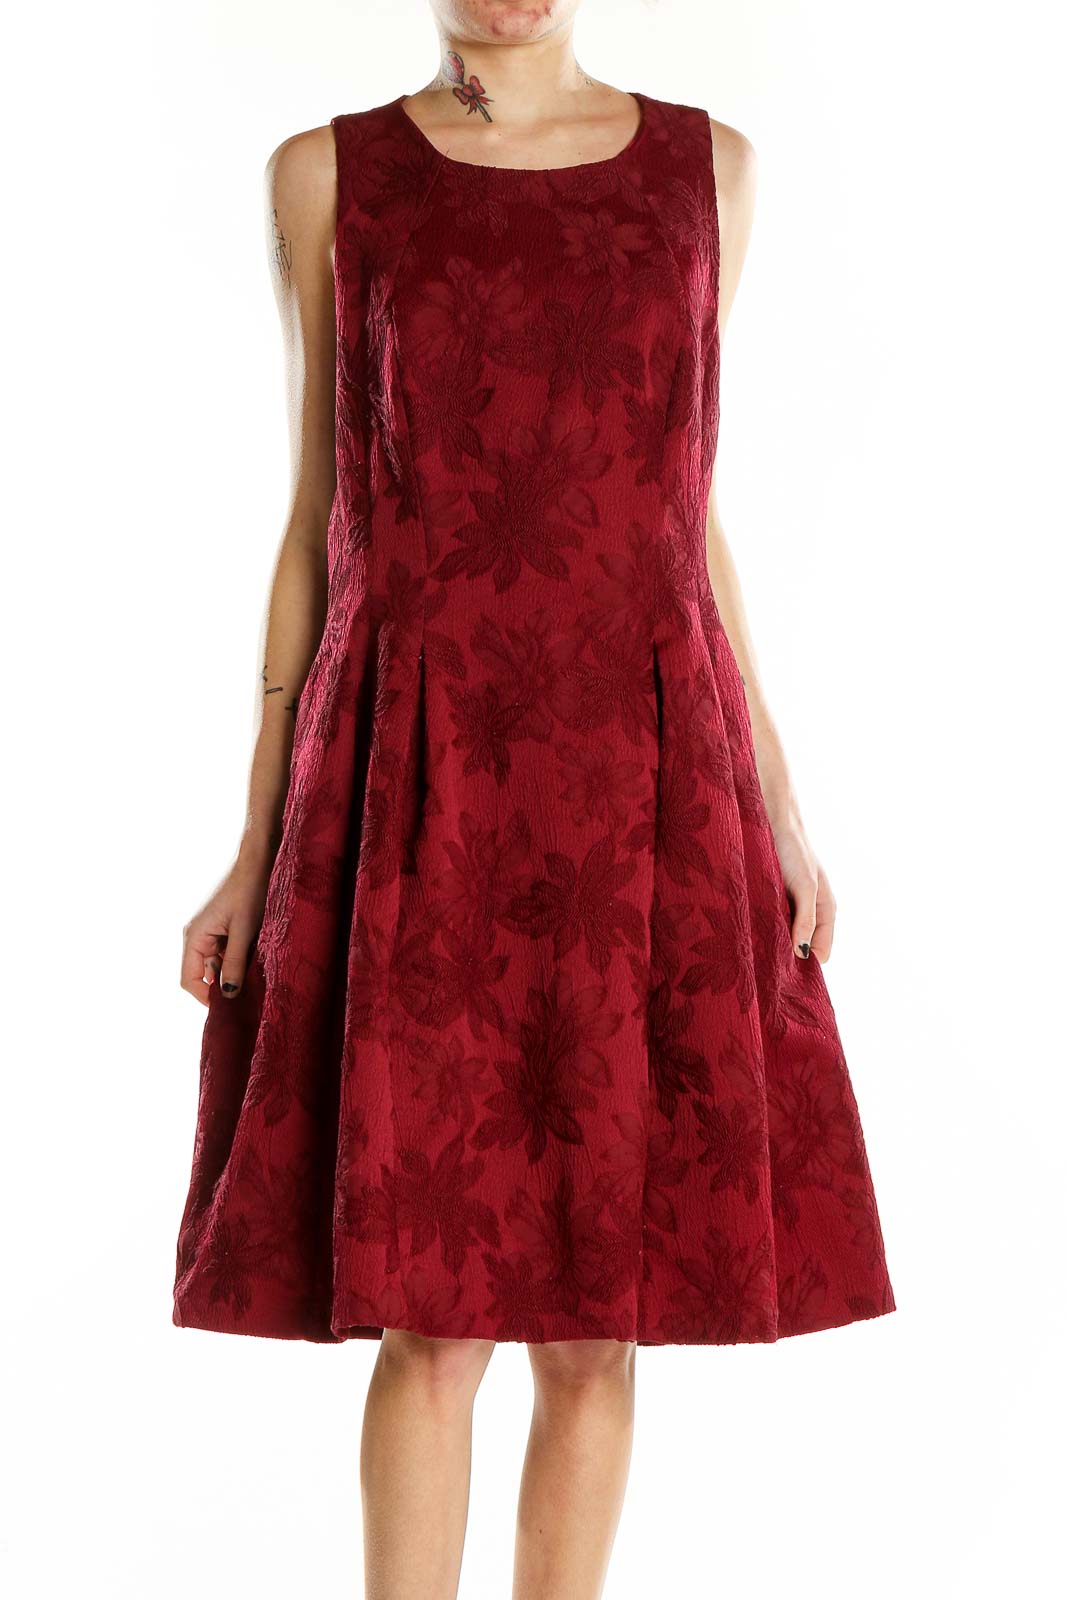 Red Flare Floral Print Dress Front